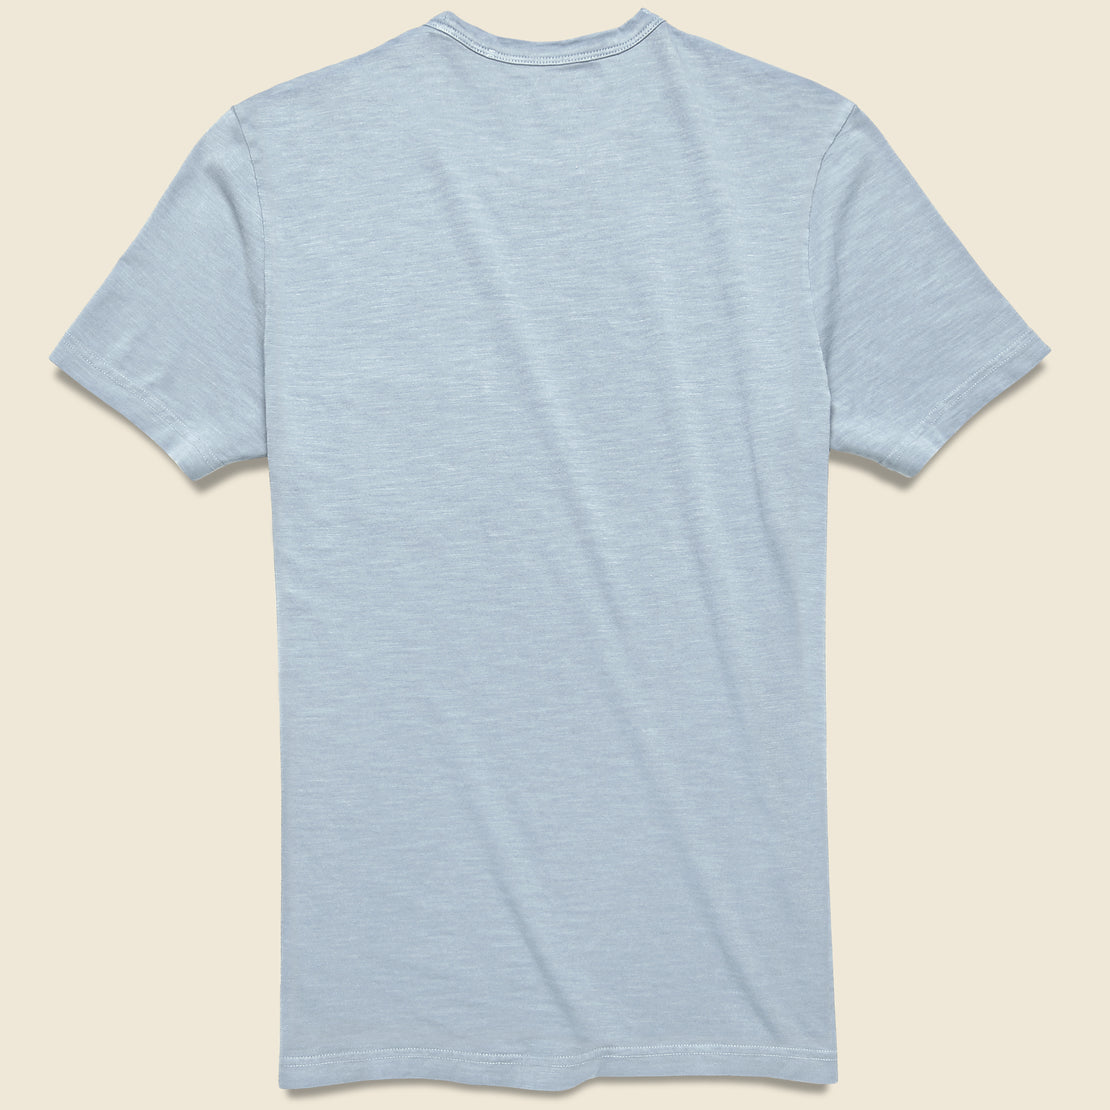 Garment Dyed Pocket Tee - Blue Breeze - Faherty - STAG Provisions - Tops - S/S Tee